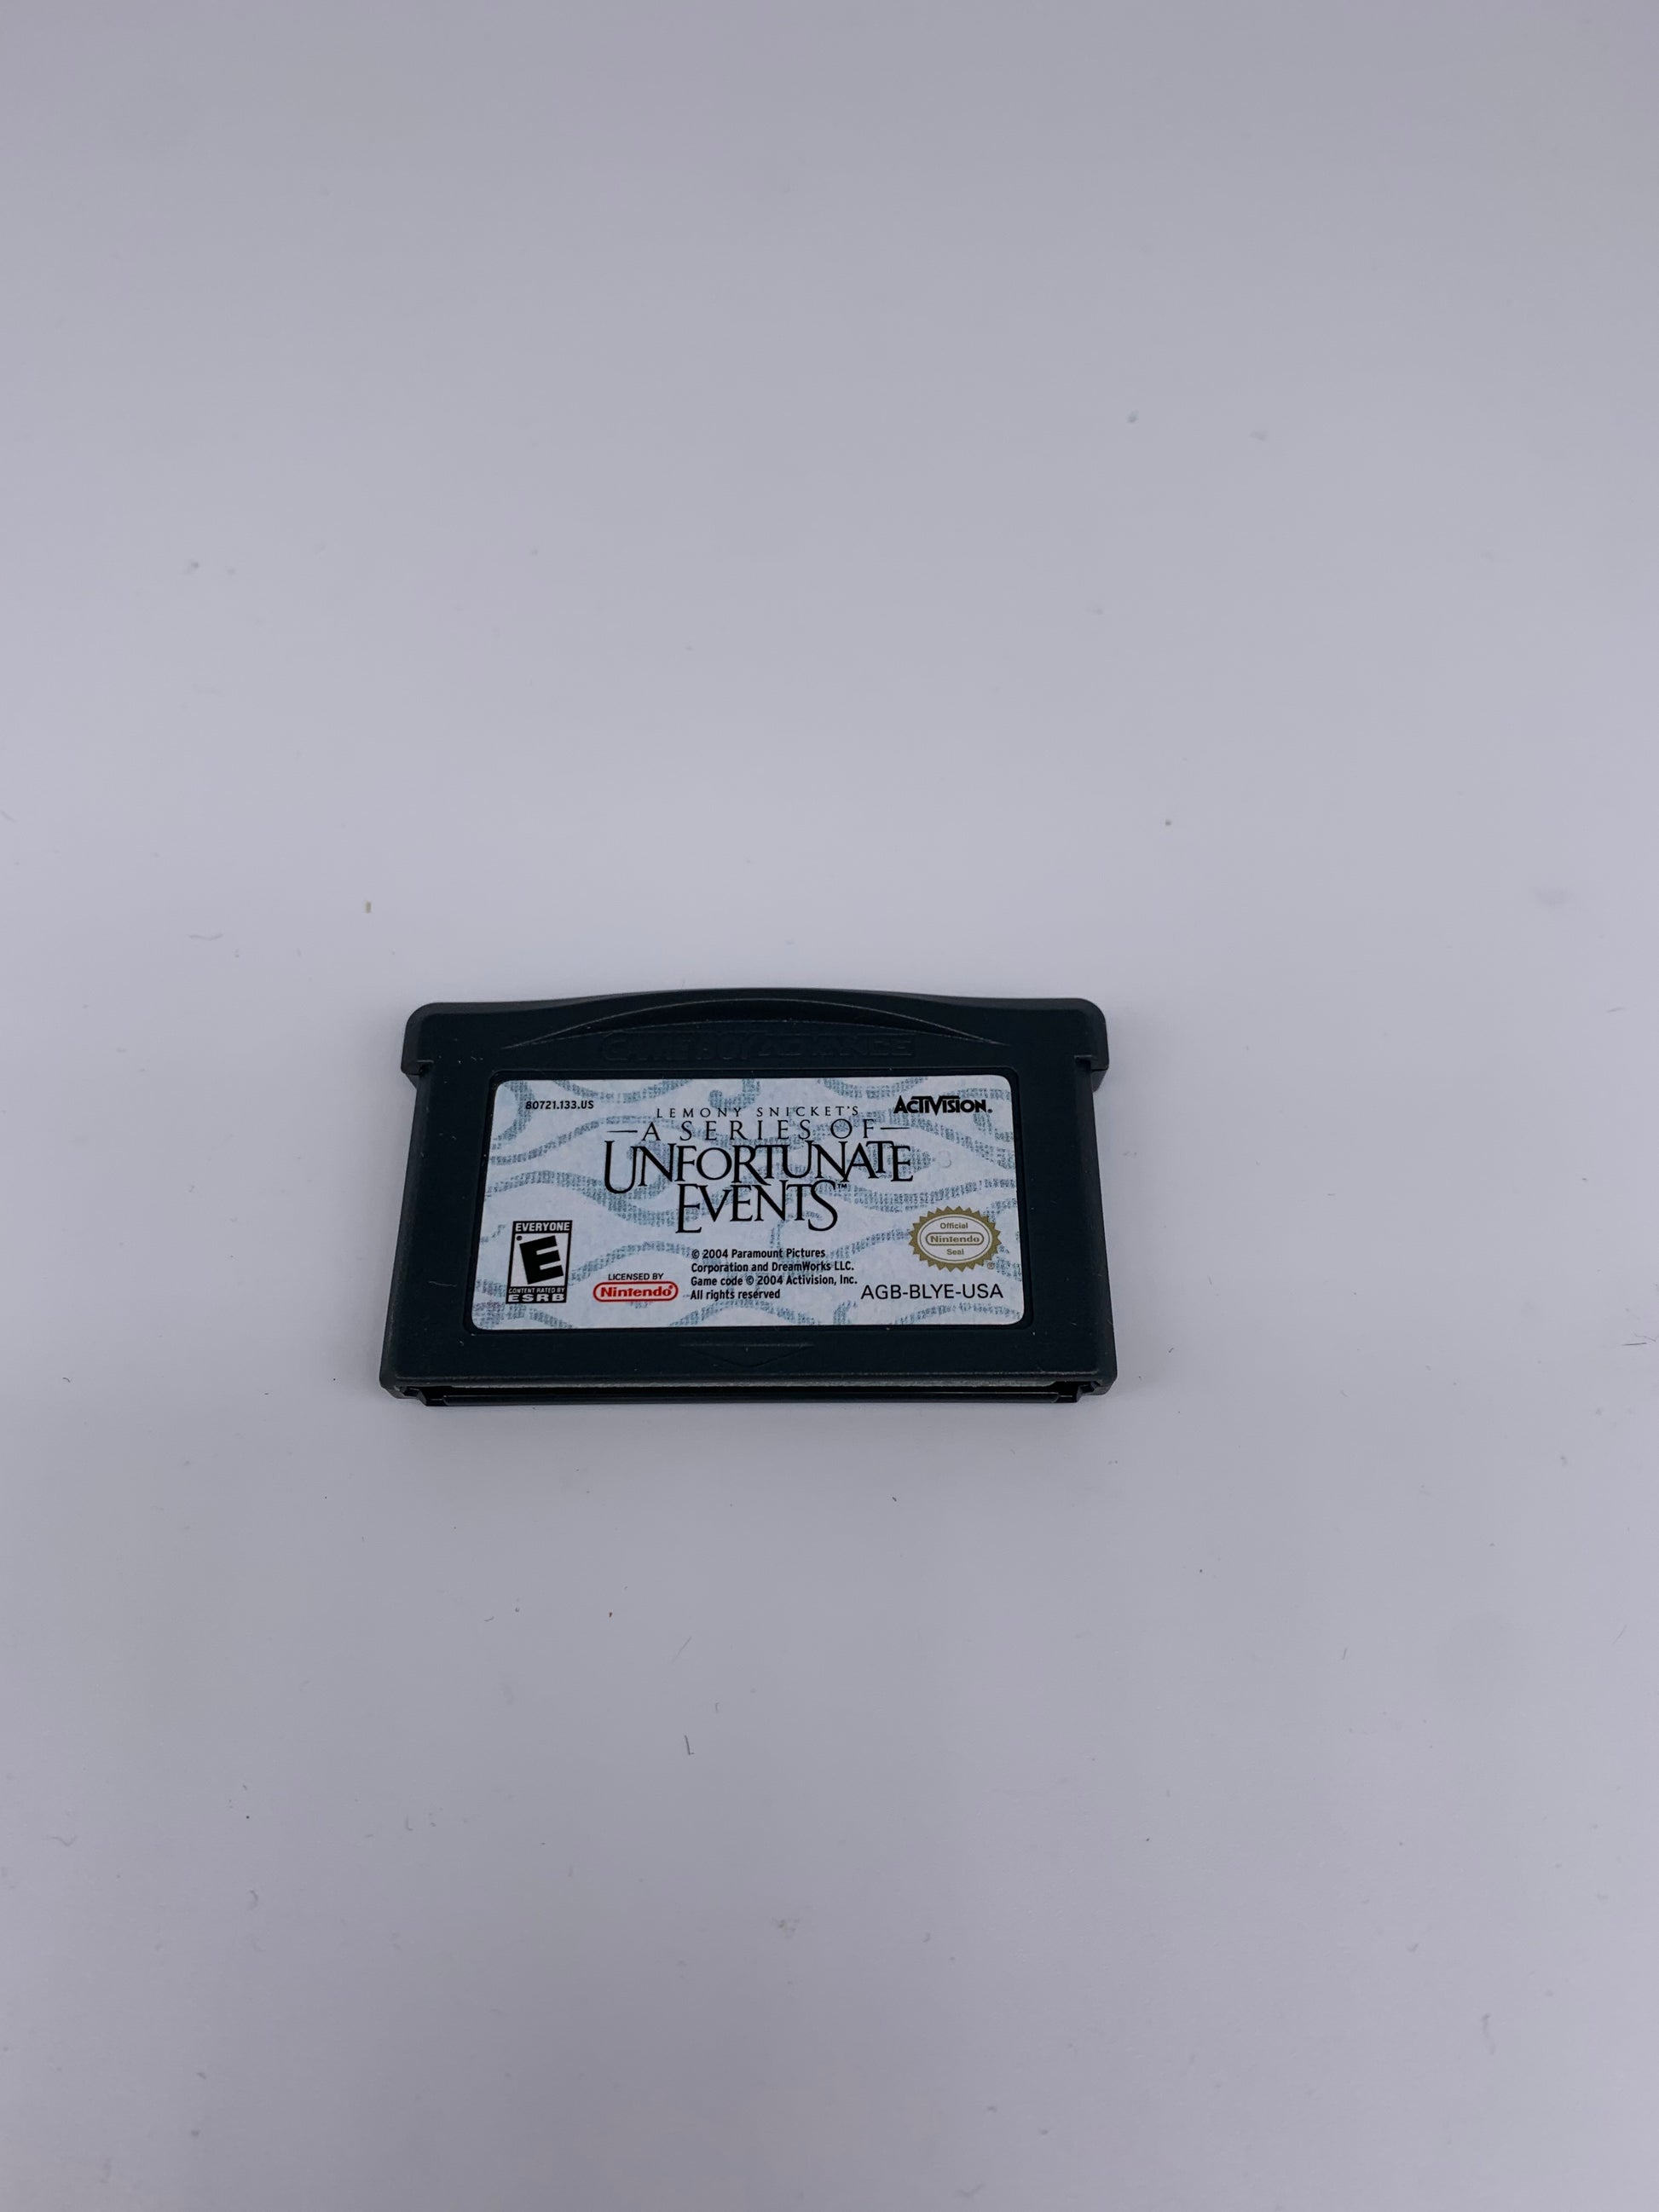 PiXEL-RETRO.COM : GAME BOY ADVANCE (GBA) GAME NTSC LEMONY SNiCKETS A SERiES OF UNFORTUNATE EVENTS